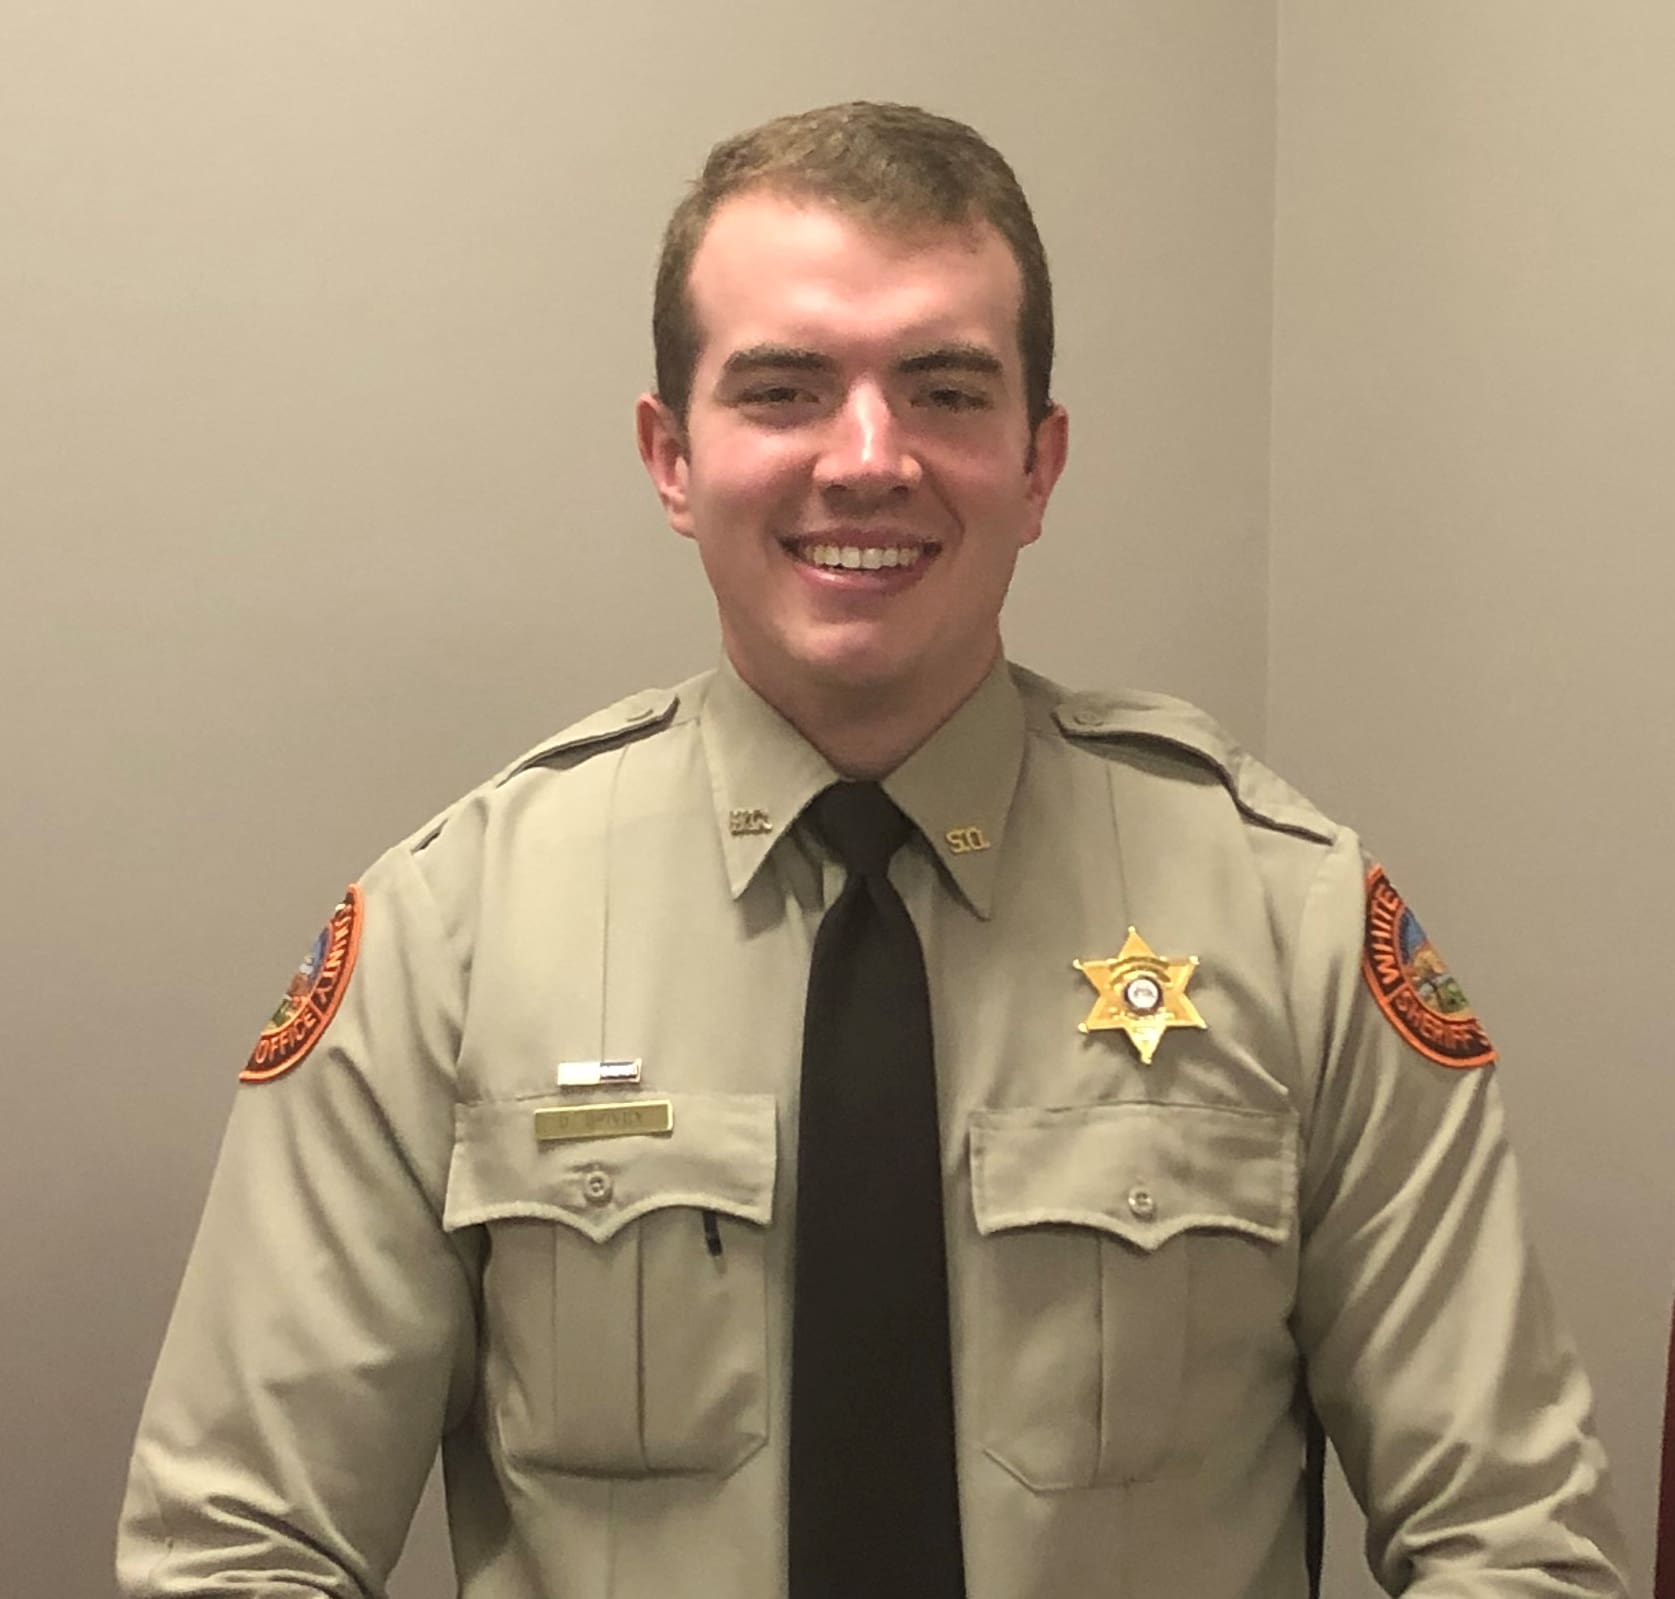 White County Deputy Completes Training And Recognized For Heroic